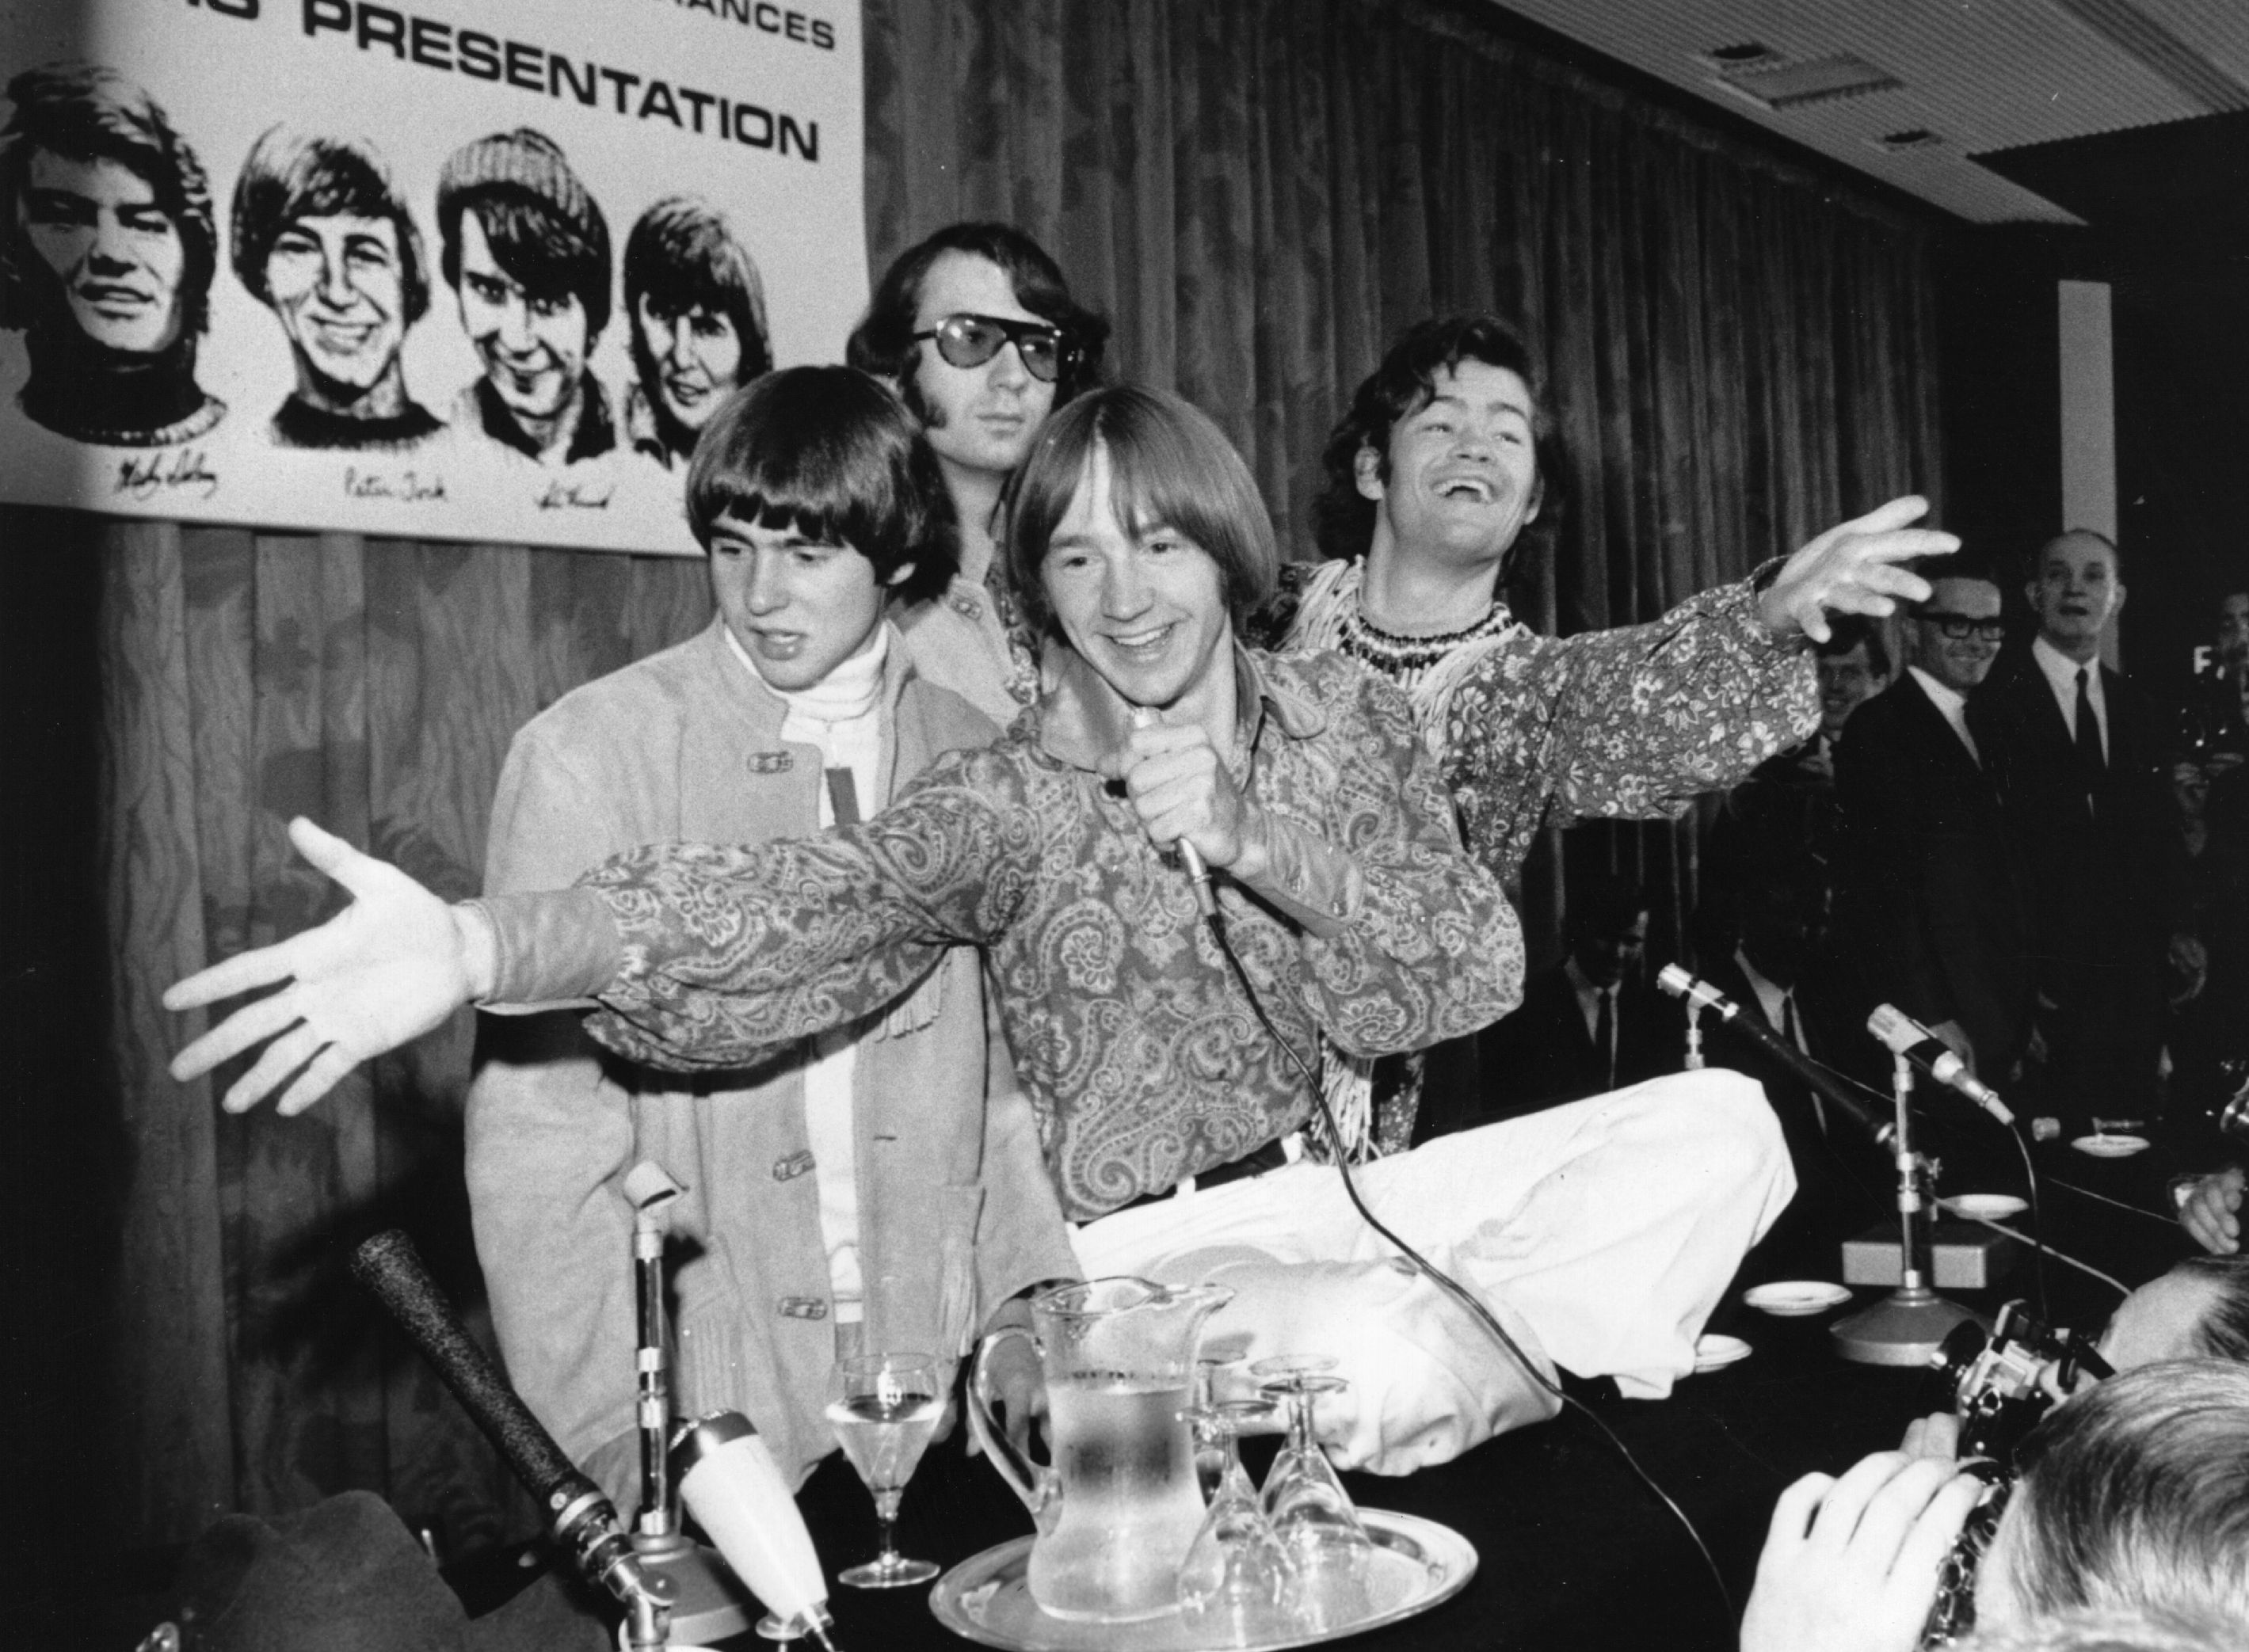 The Monkees' Davy Jones, Mike Nesmith, Peter Tork, and Micky Dolenz